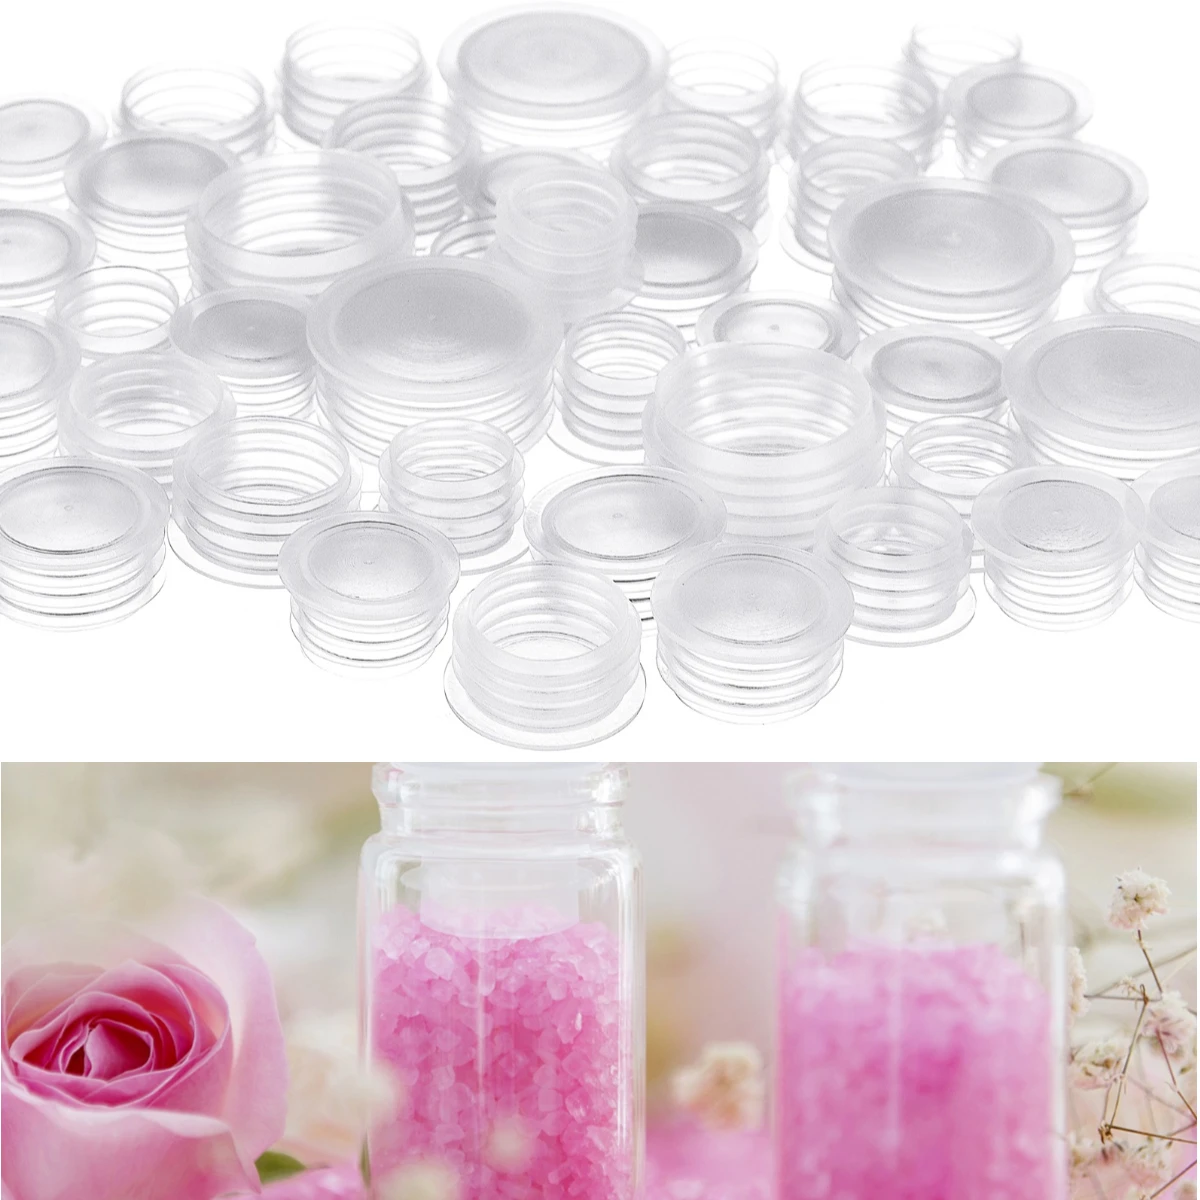 100Pieces Salt Pepper Shaker Stoppers 1/2 Inch 9/16 Inch 5/8 Inch 11/16 Inch 7/8 Inch Plastic Salt Shaker Plug Repla